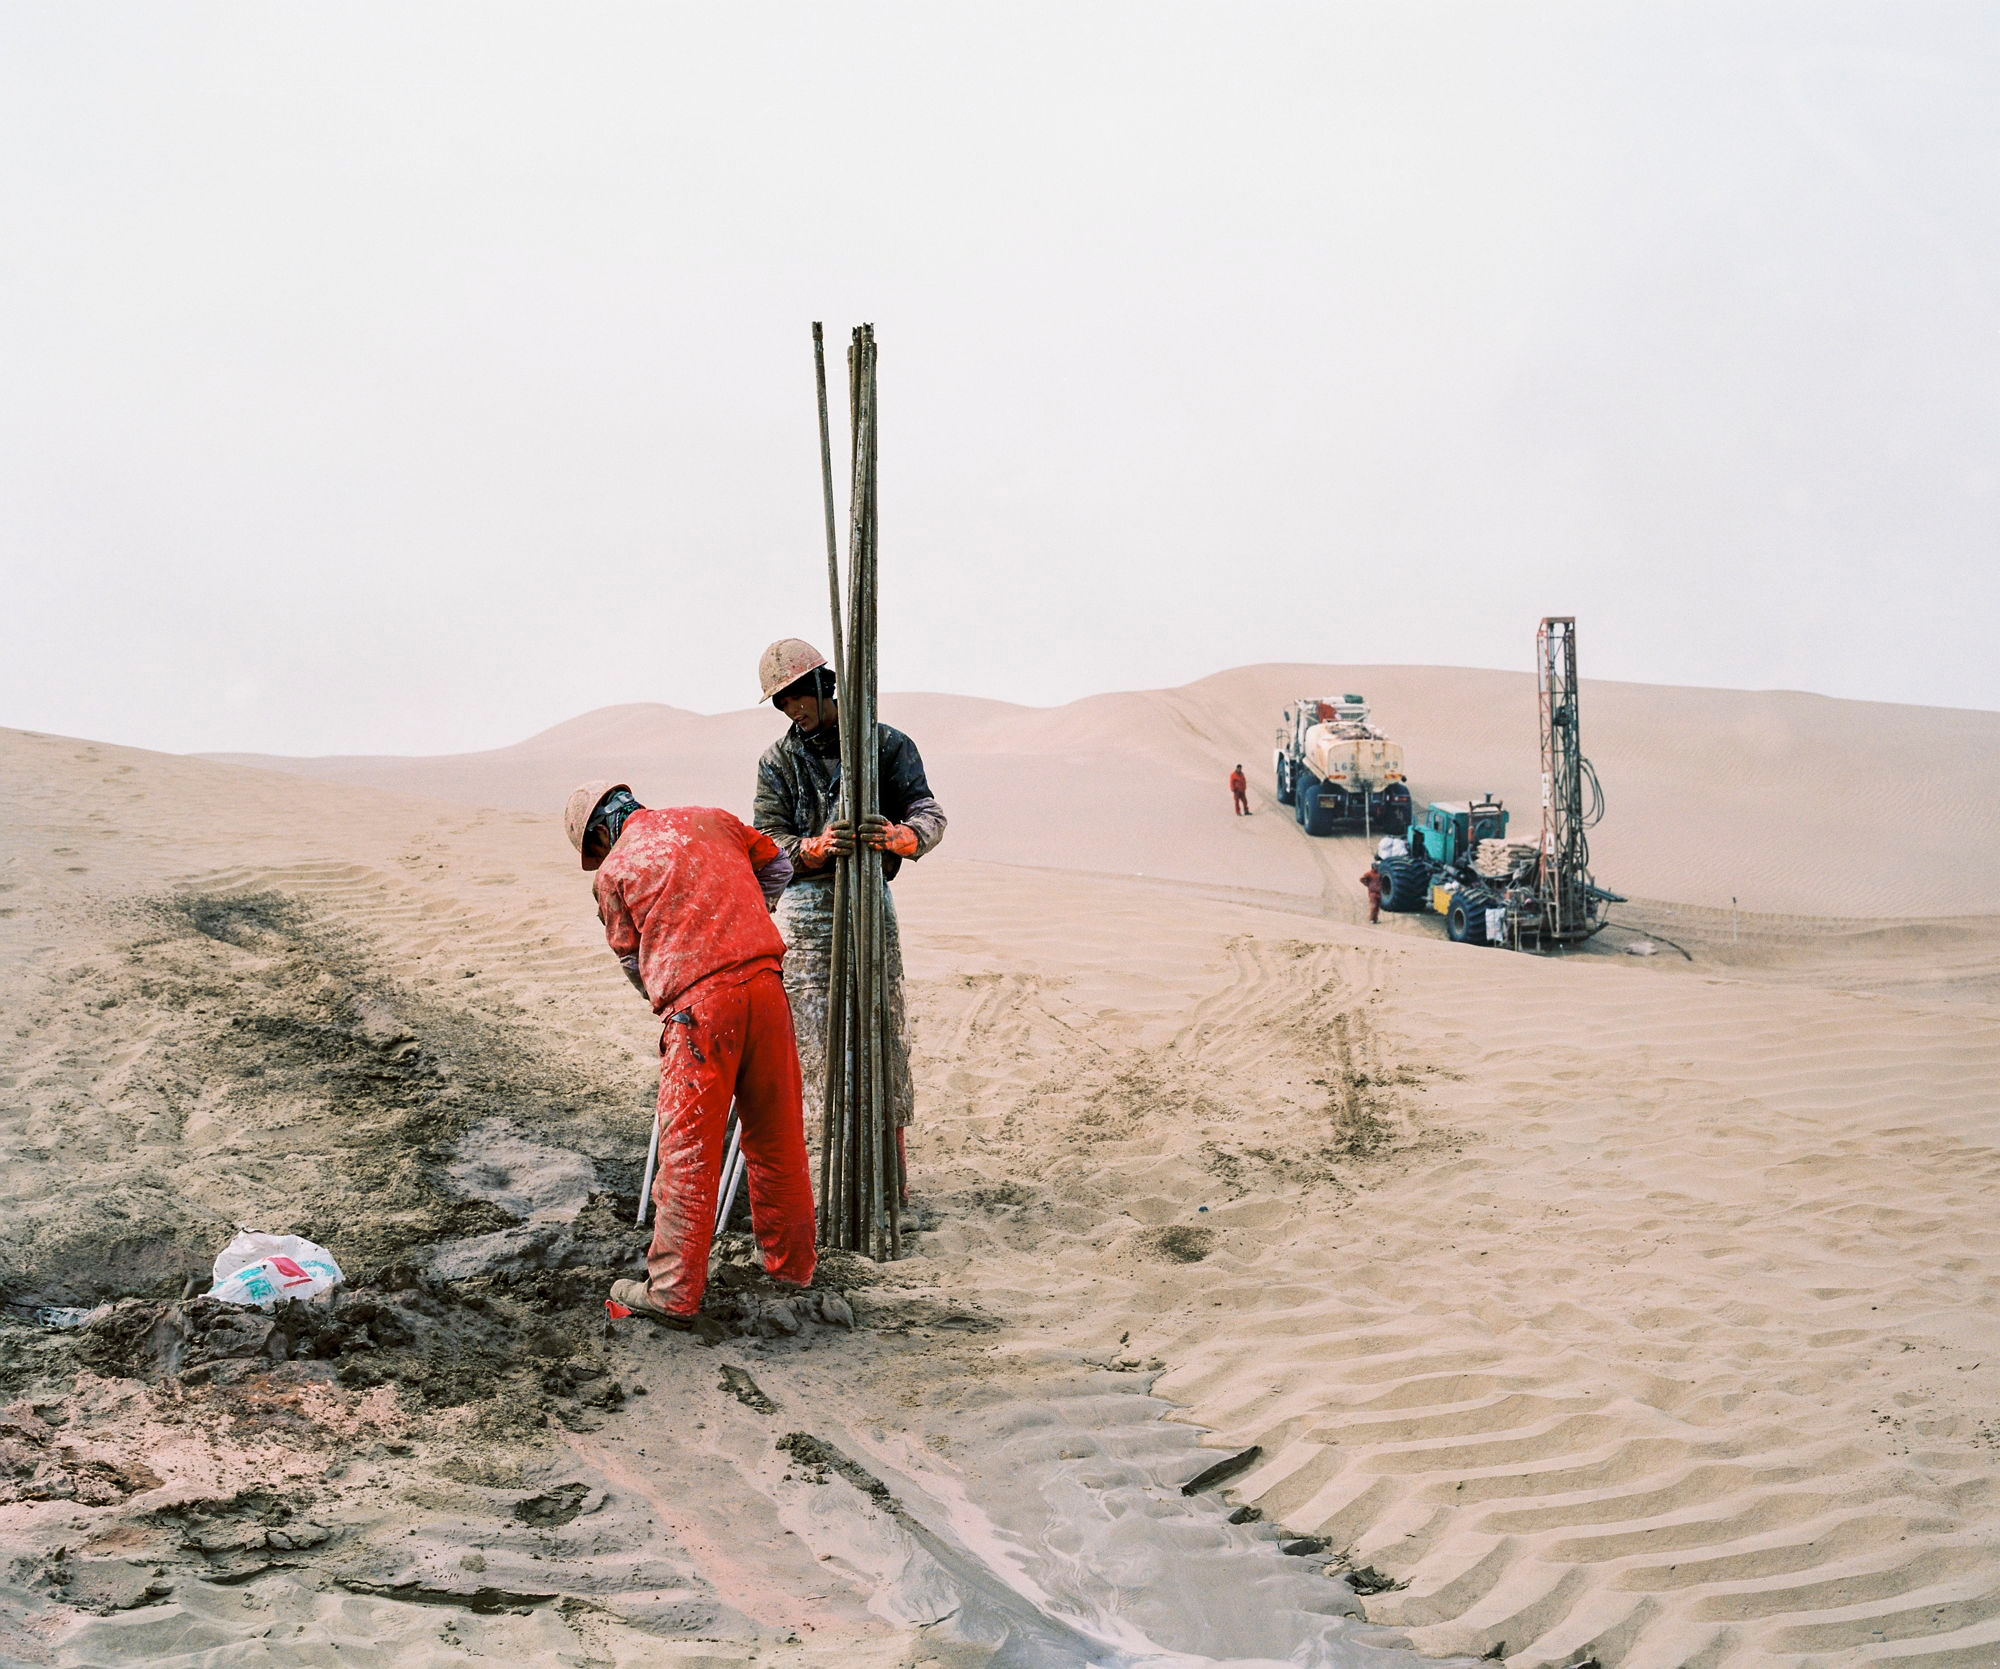 An oil exploration team from a Chinese state-owned company operates in the Taklamakan Desert, in China's westermost province of Xinjiang, in December 2016. (Patrick Wack)